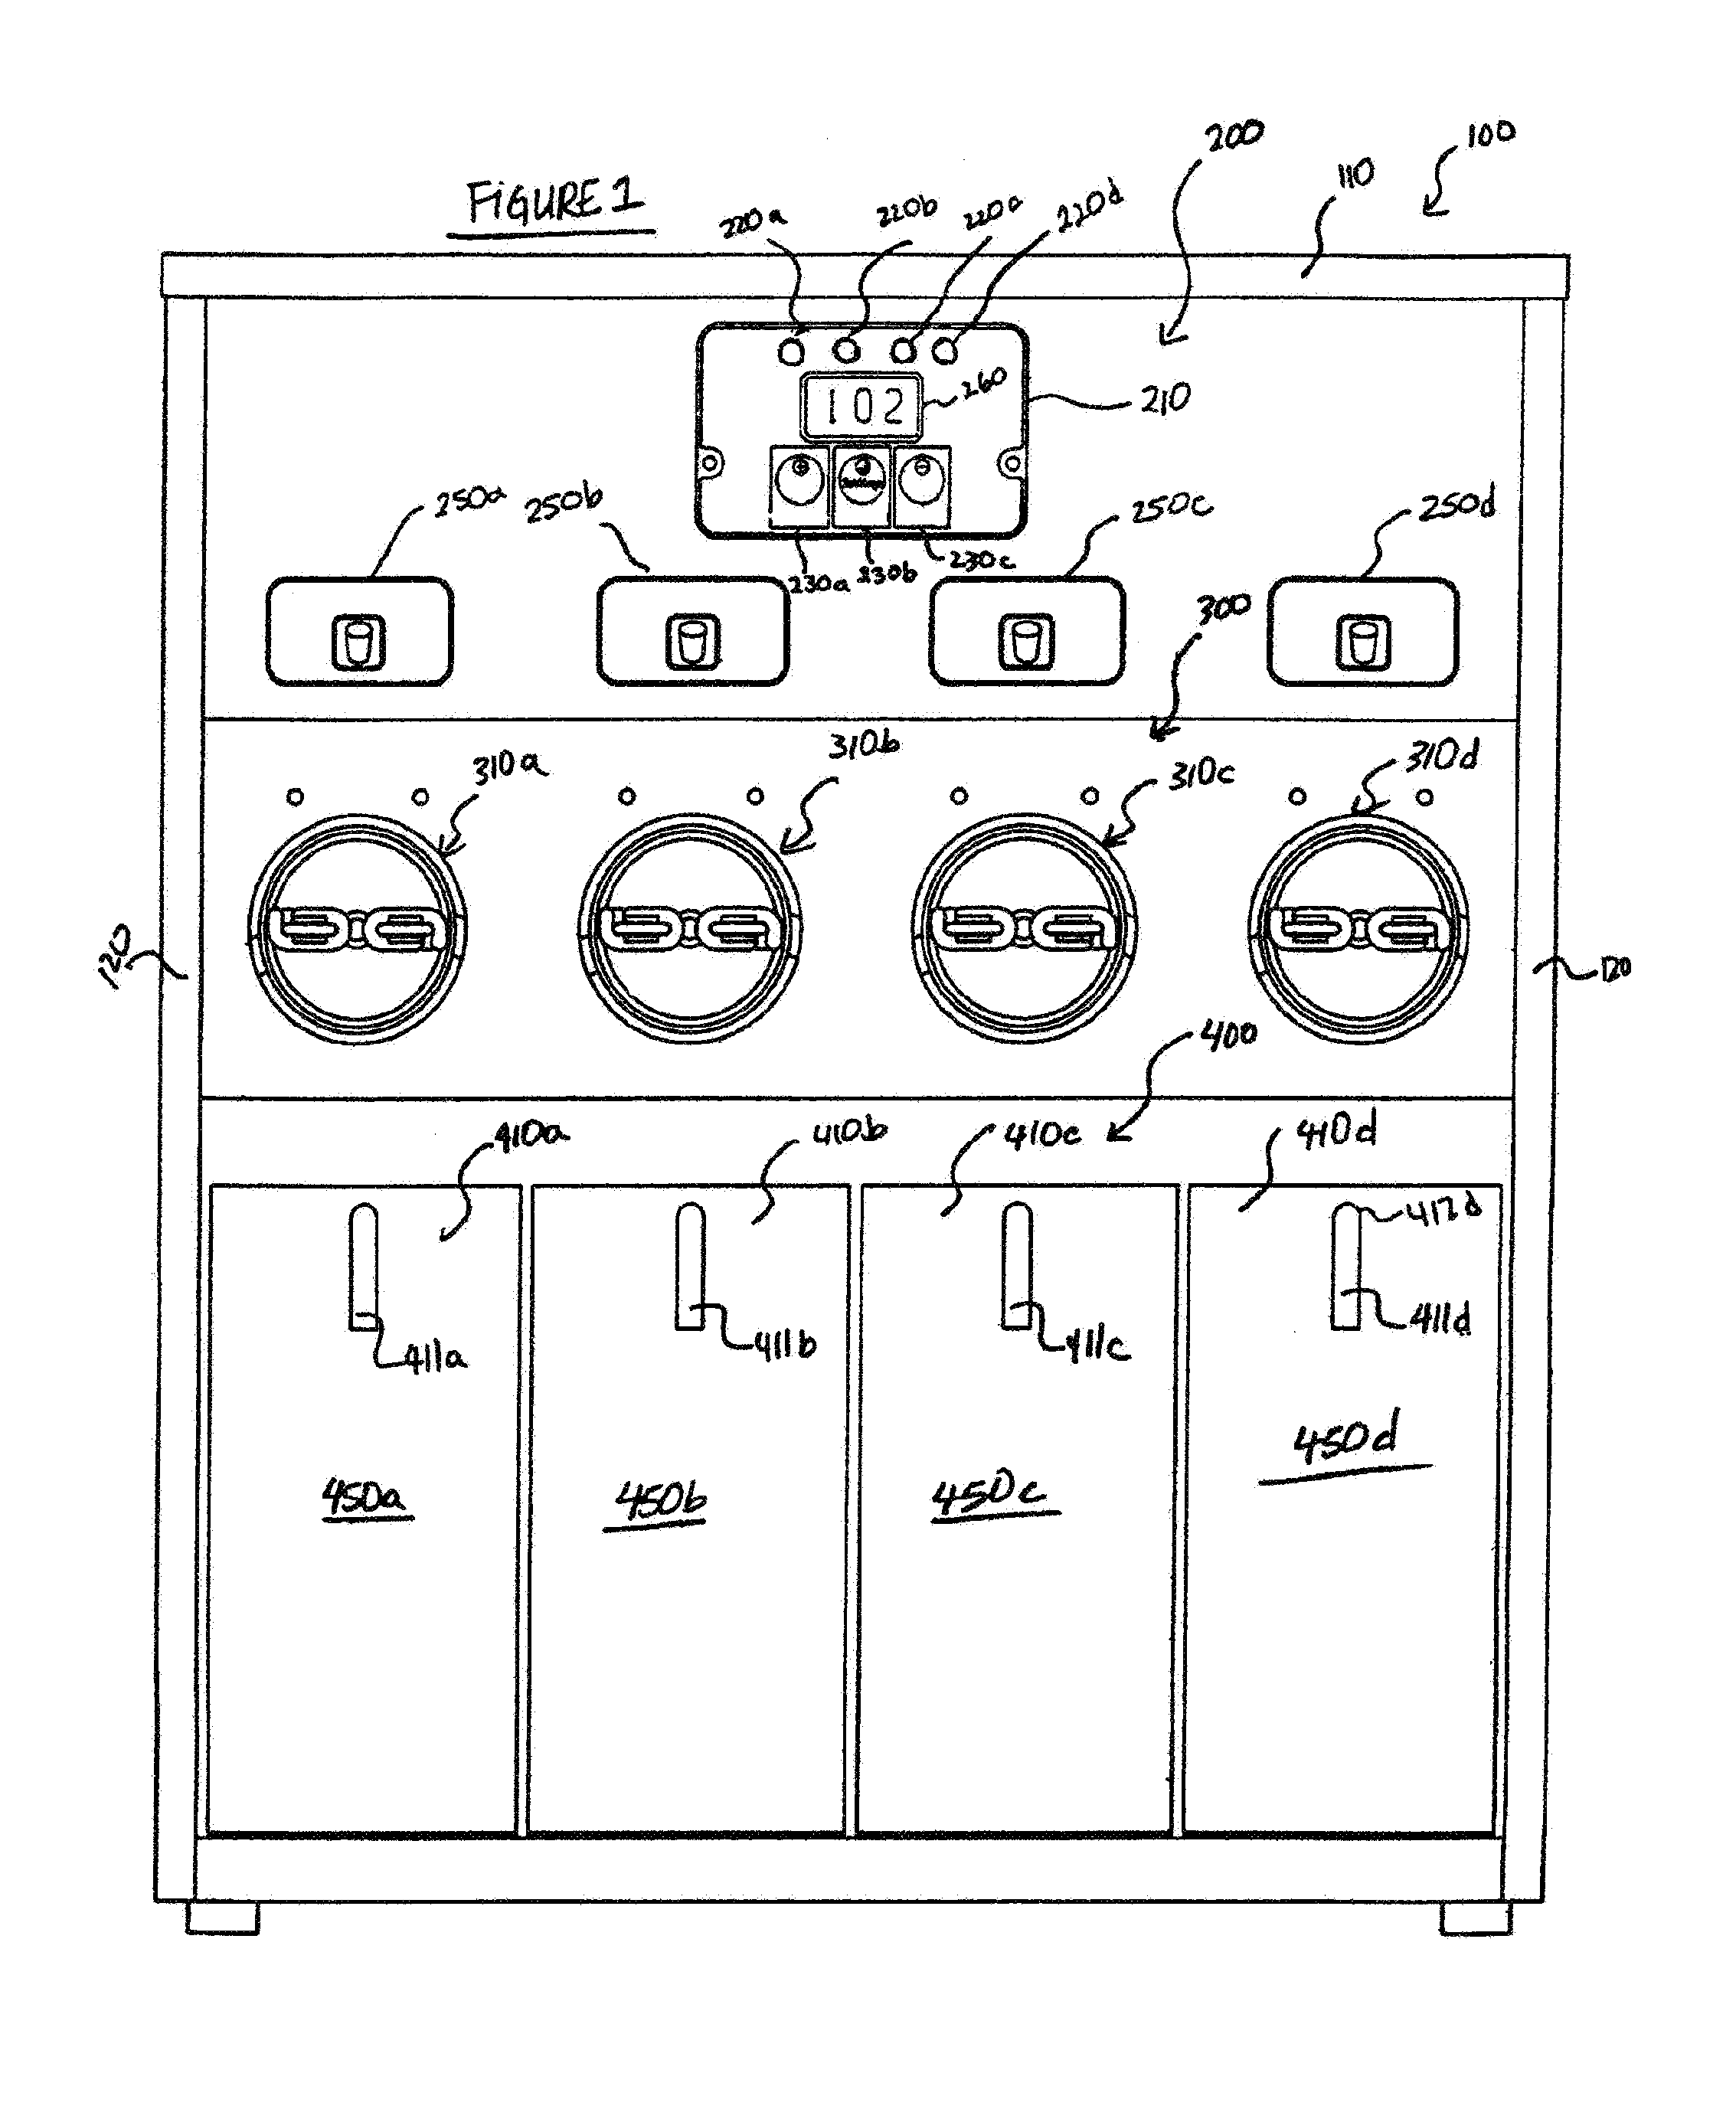 Method and apparatus for dispensing hair dye products